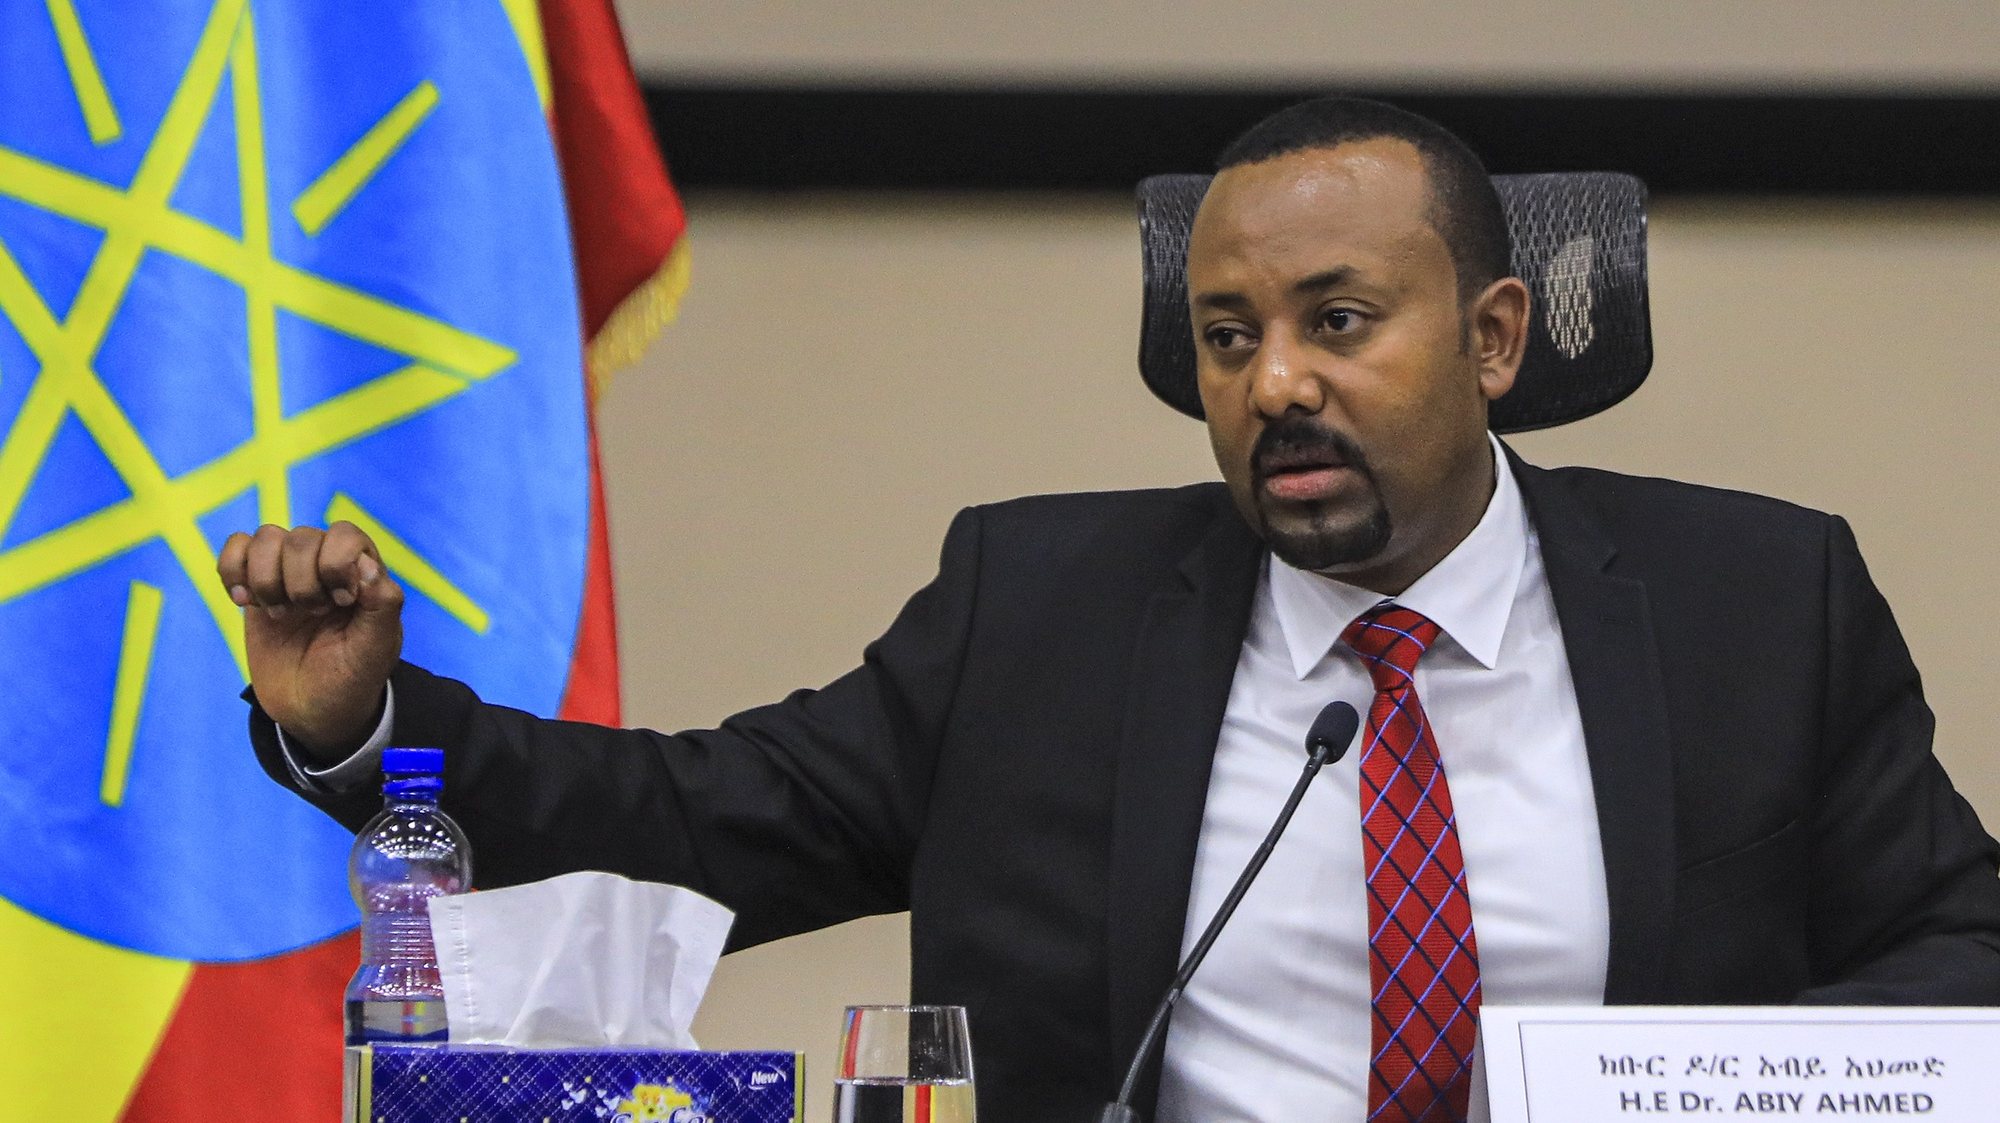 epa08852855 Ethiopian Prime Minister Abiy Ahmed speaks during a question and answer session in parliament, Addis Ababa, Ethiopia 30 November 2020. Ethiopiaâ€™s military intervention in the northern Tigray region comes after Tigray People&#039;s Liberation Front (TPLF) forces allegedly attacked an army base on 03 November 2020 sparking weeks of unrest with over 40,000 refugees fleeing to Sudan.  EPA/STR